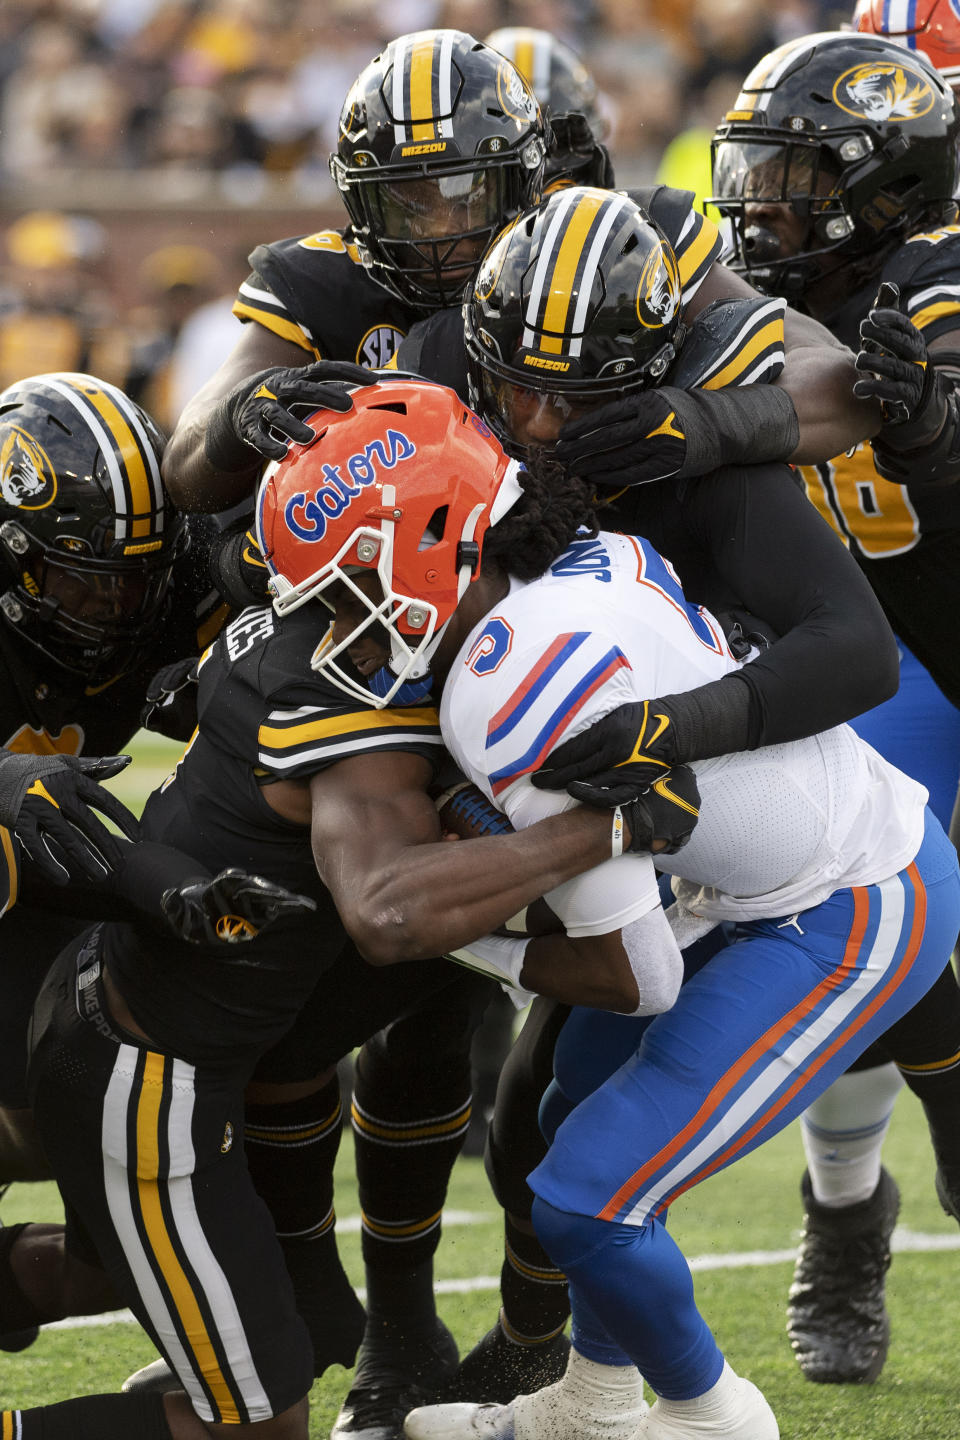 Florida quarterback Emory Jones is tackled by several Missouri defenders during the first quarter of an NCAA college football game Saturday, Nov. 20, 2021, in Columbia, Mo. (AP Photo/L.G. Patterson)